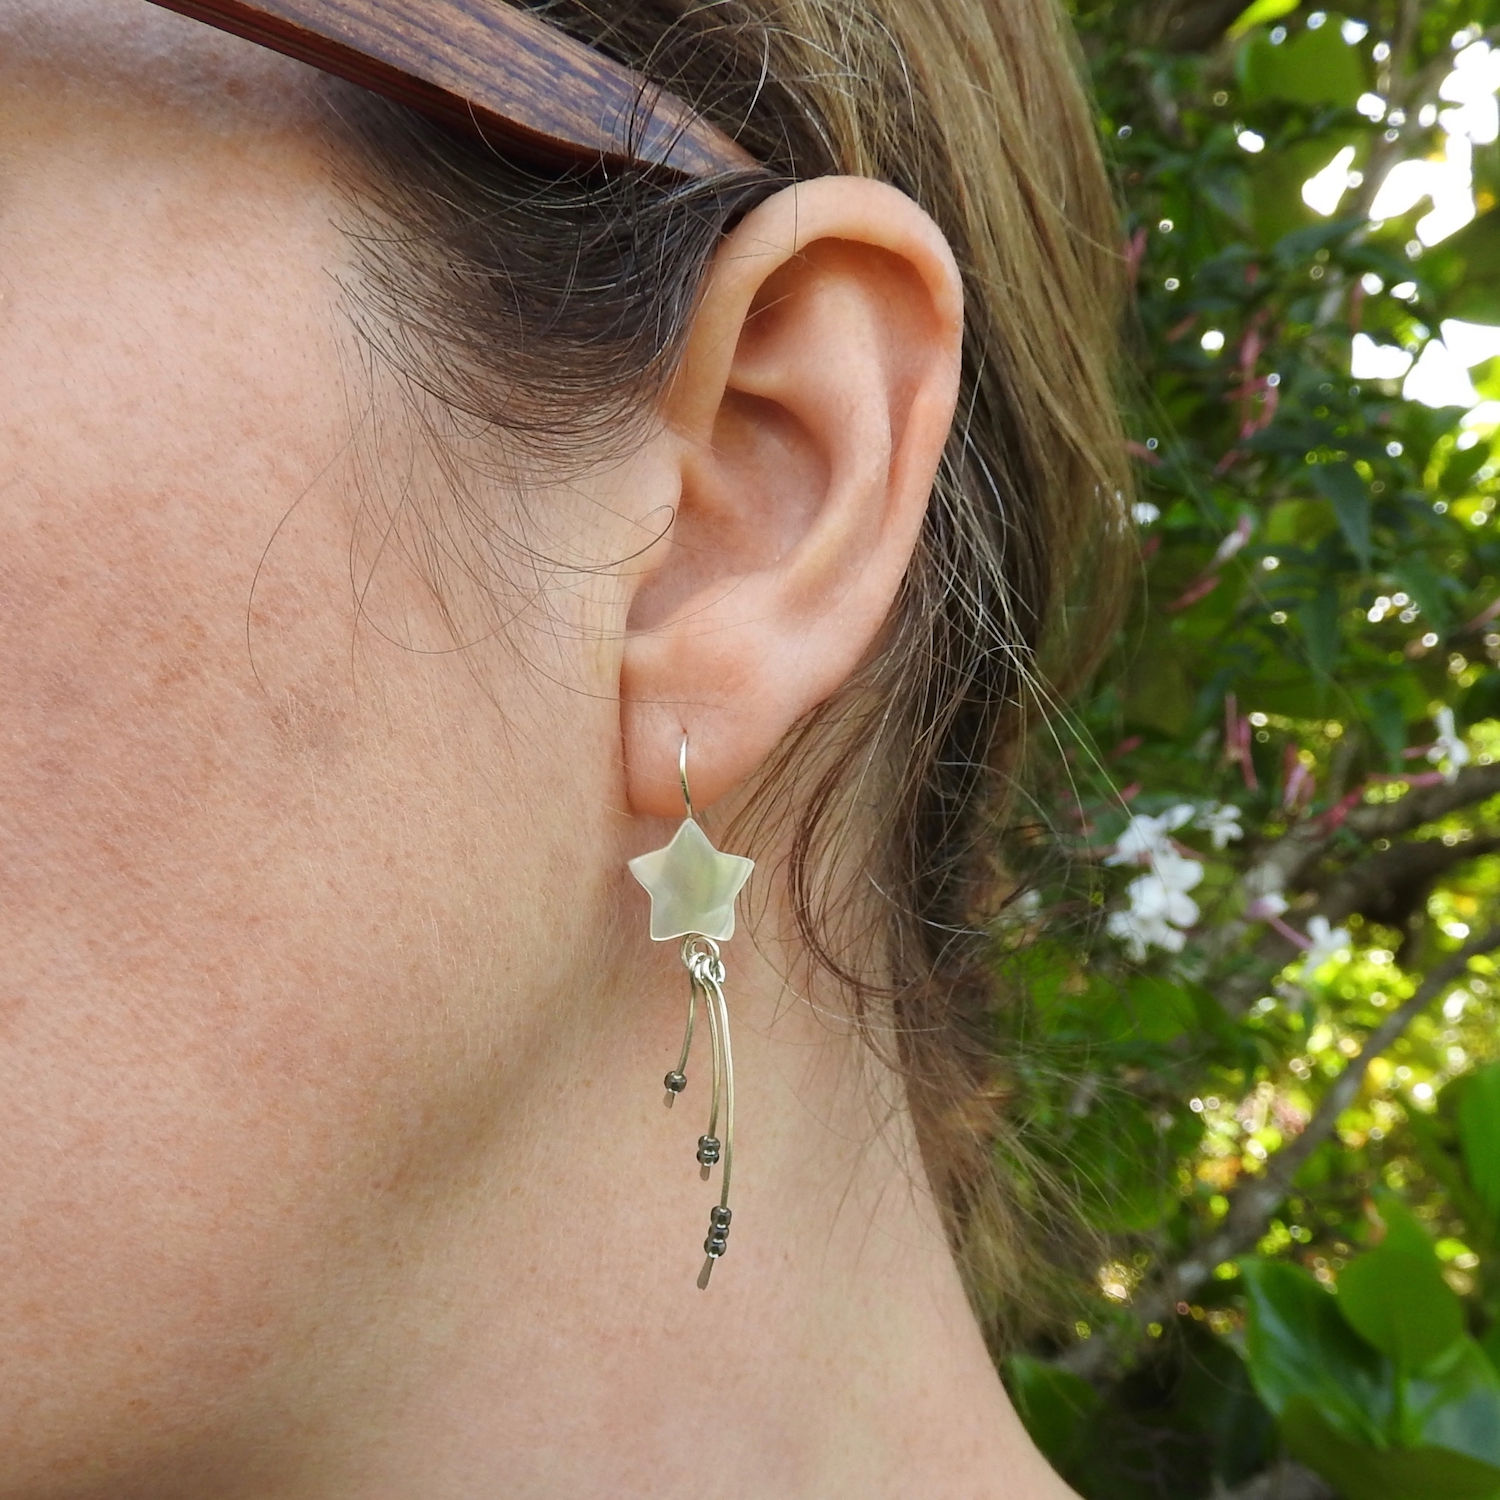 Shooting star earrings with three dangles being worn by model